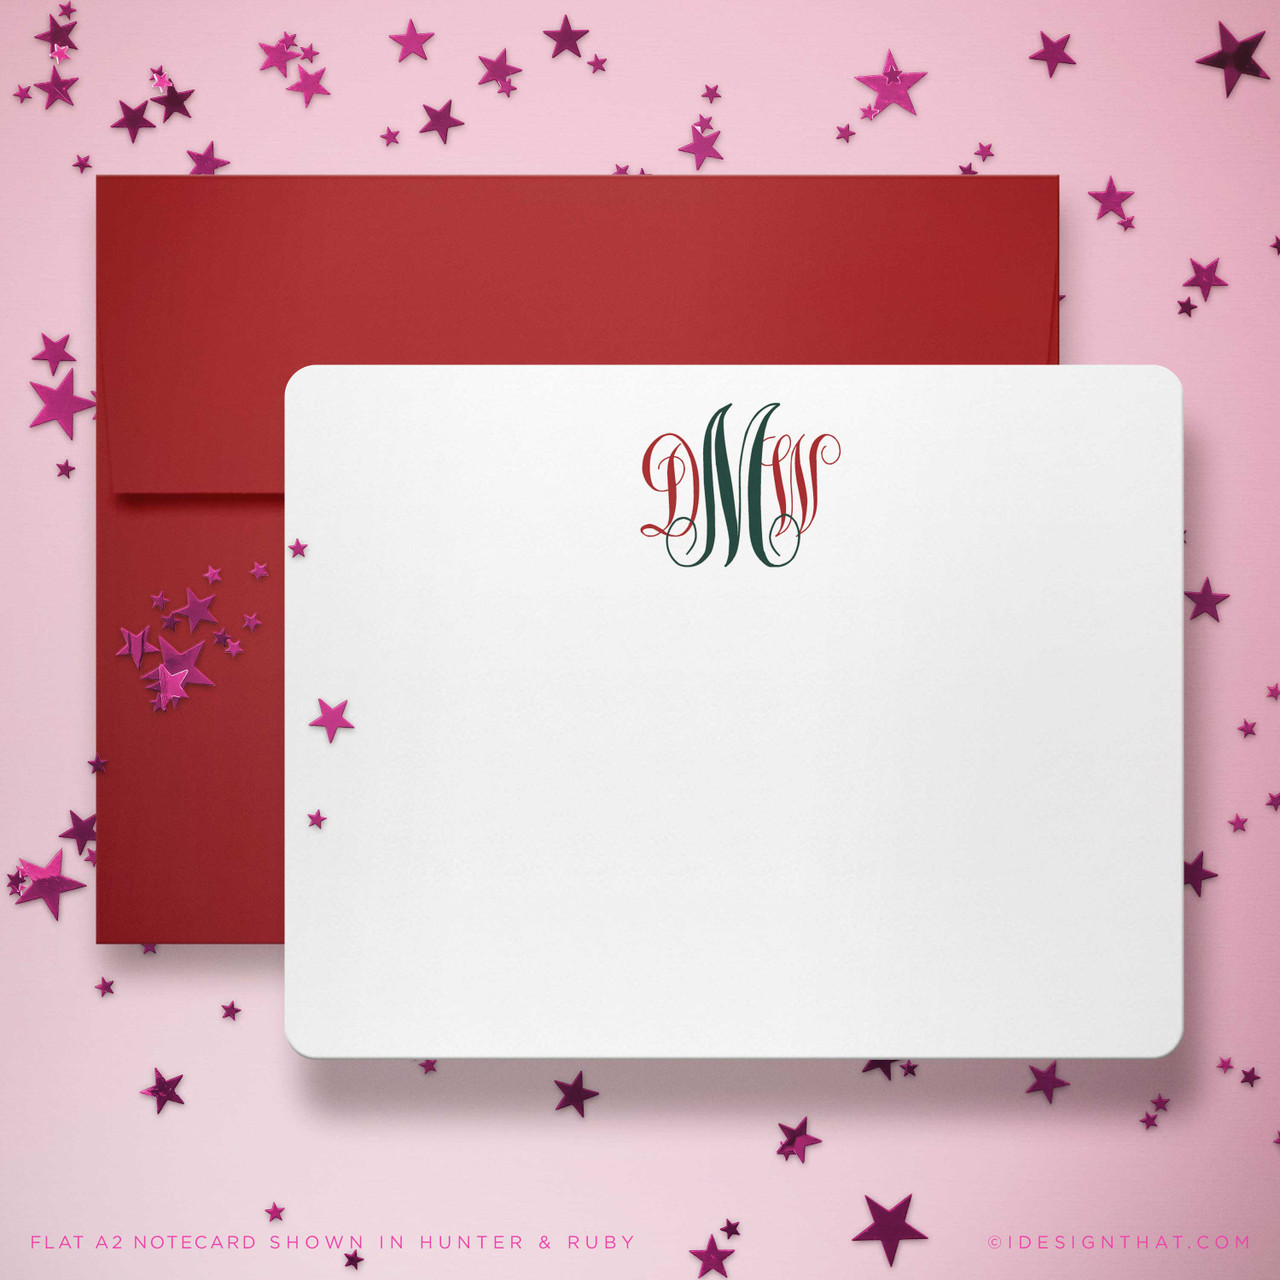 Personalized Stationery Set for Women Pretty Flat Note Cards